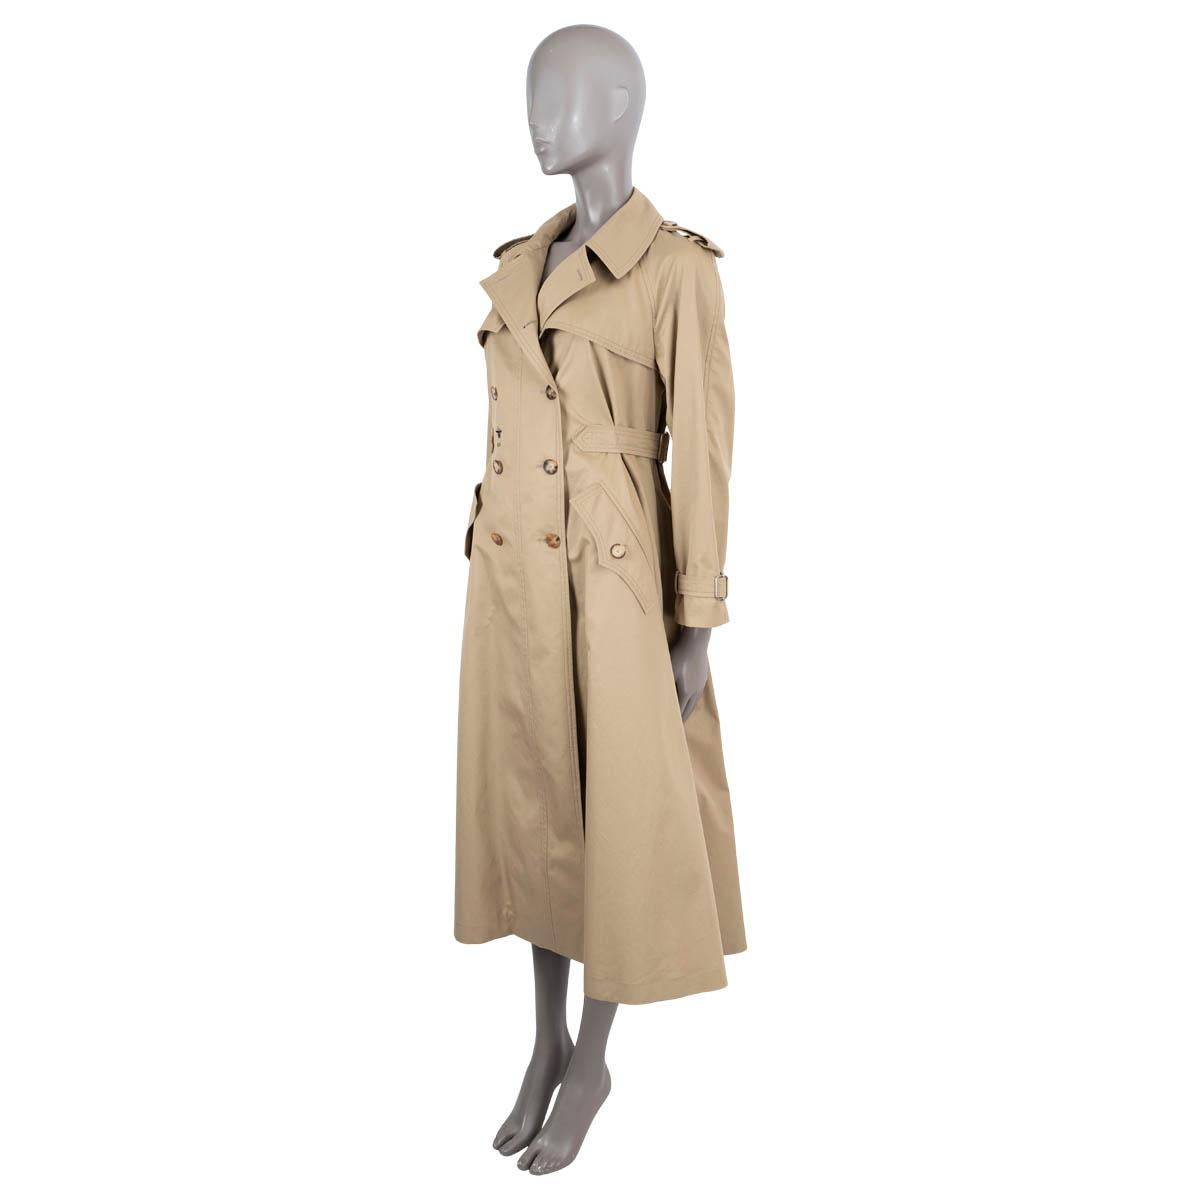 100% authentic Christian Dior classic trench coat in beige gaberdine cotton (100%). Features notch lapels, epaulettes, adjustable waist and cuff straps, storm flap and embroidered bee logo. Closes with double-breasted horn buttons on the front.